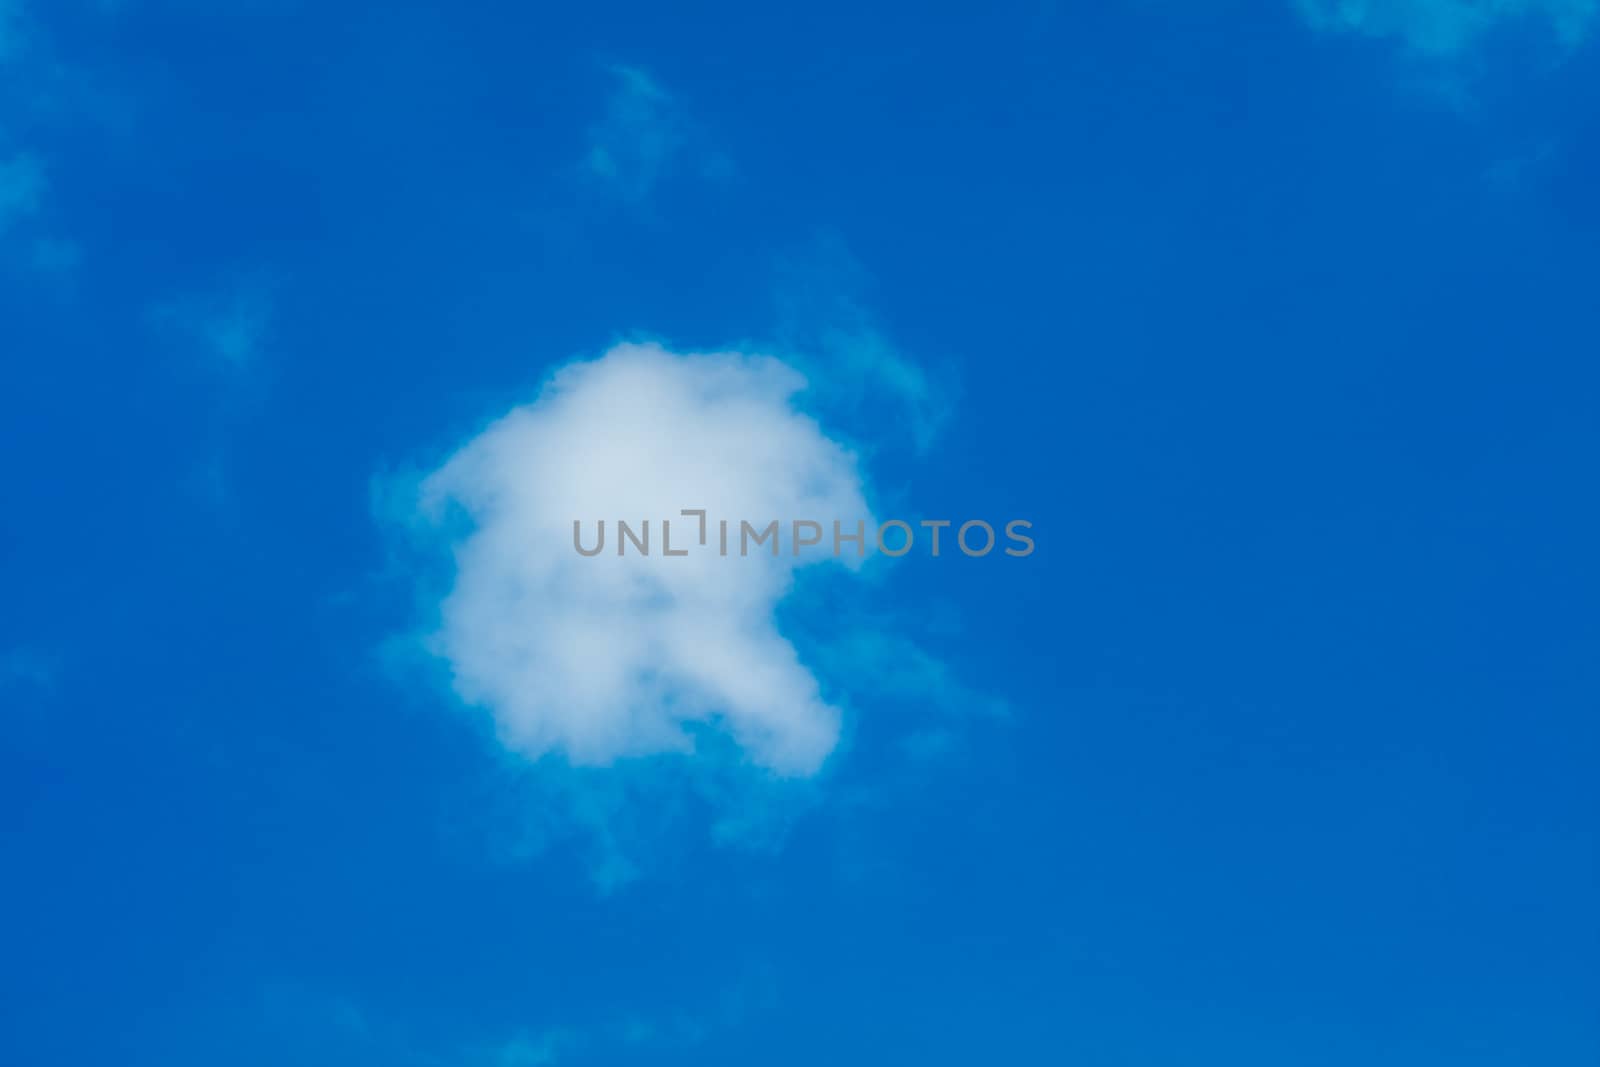 One simple cloud on sky in summer sunny day clean concept